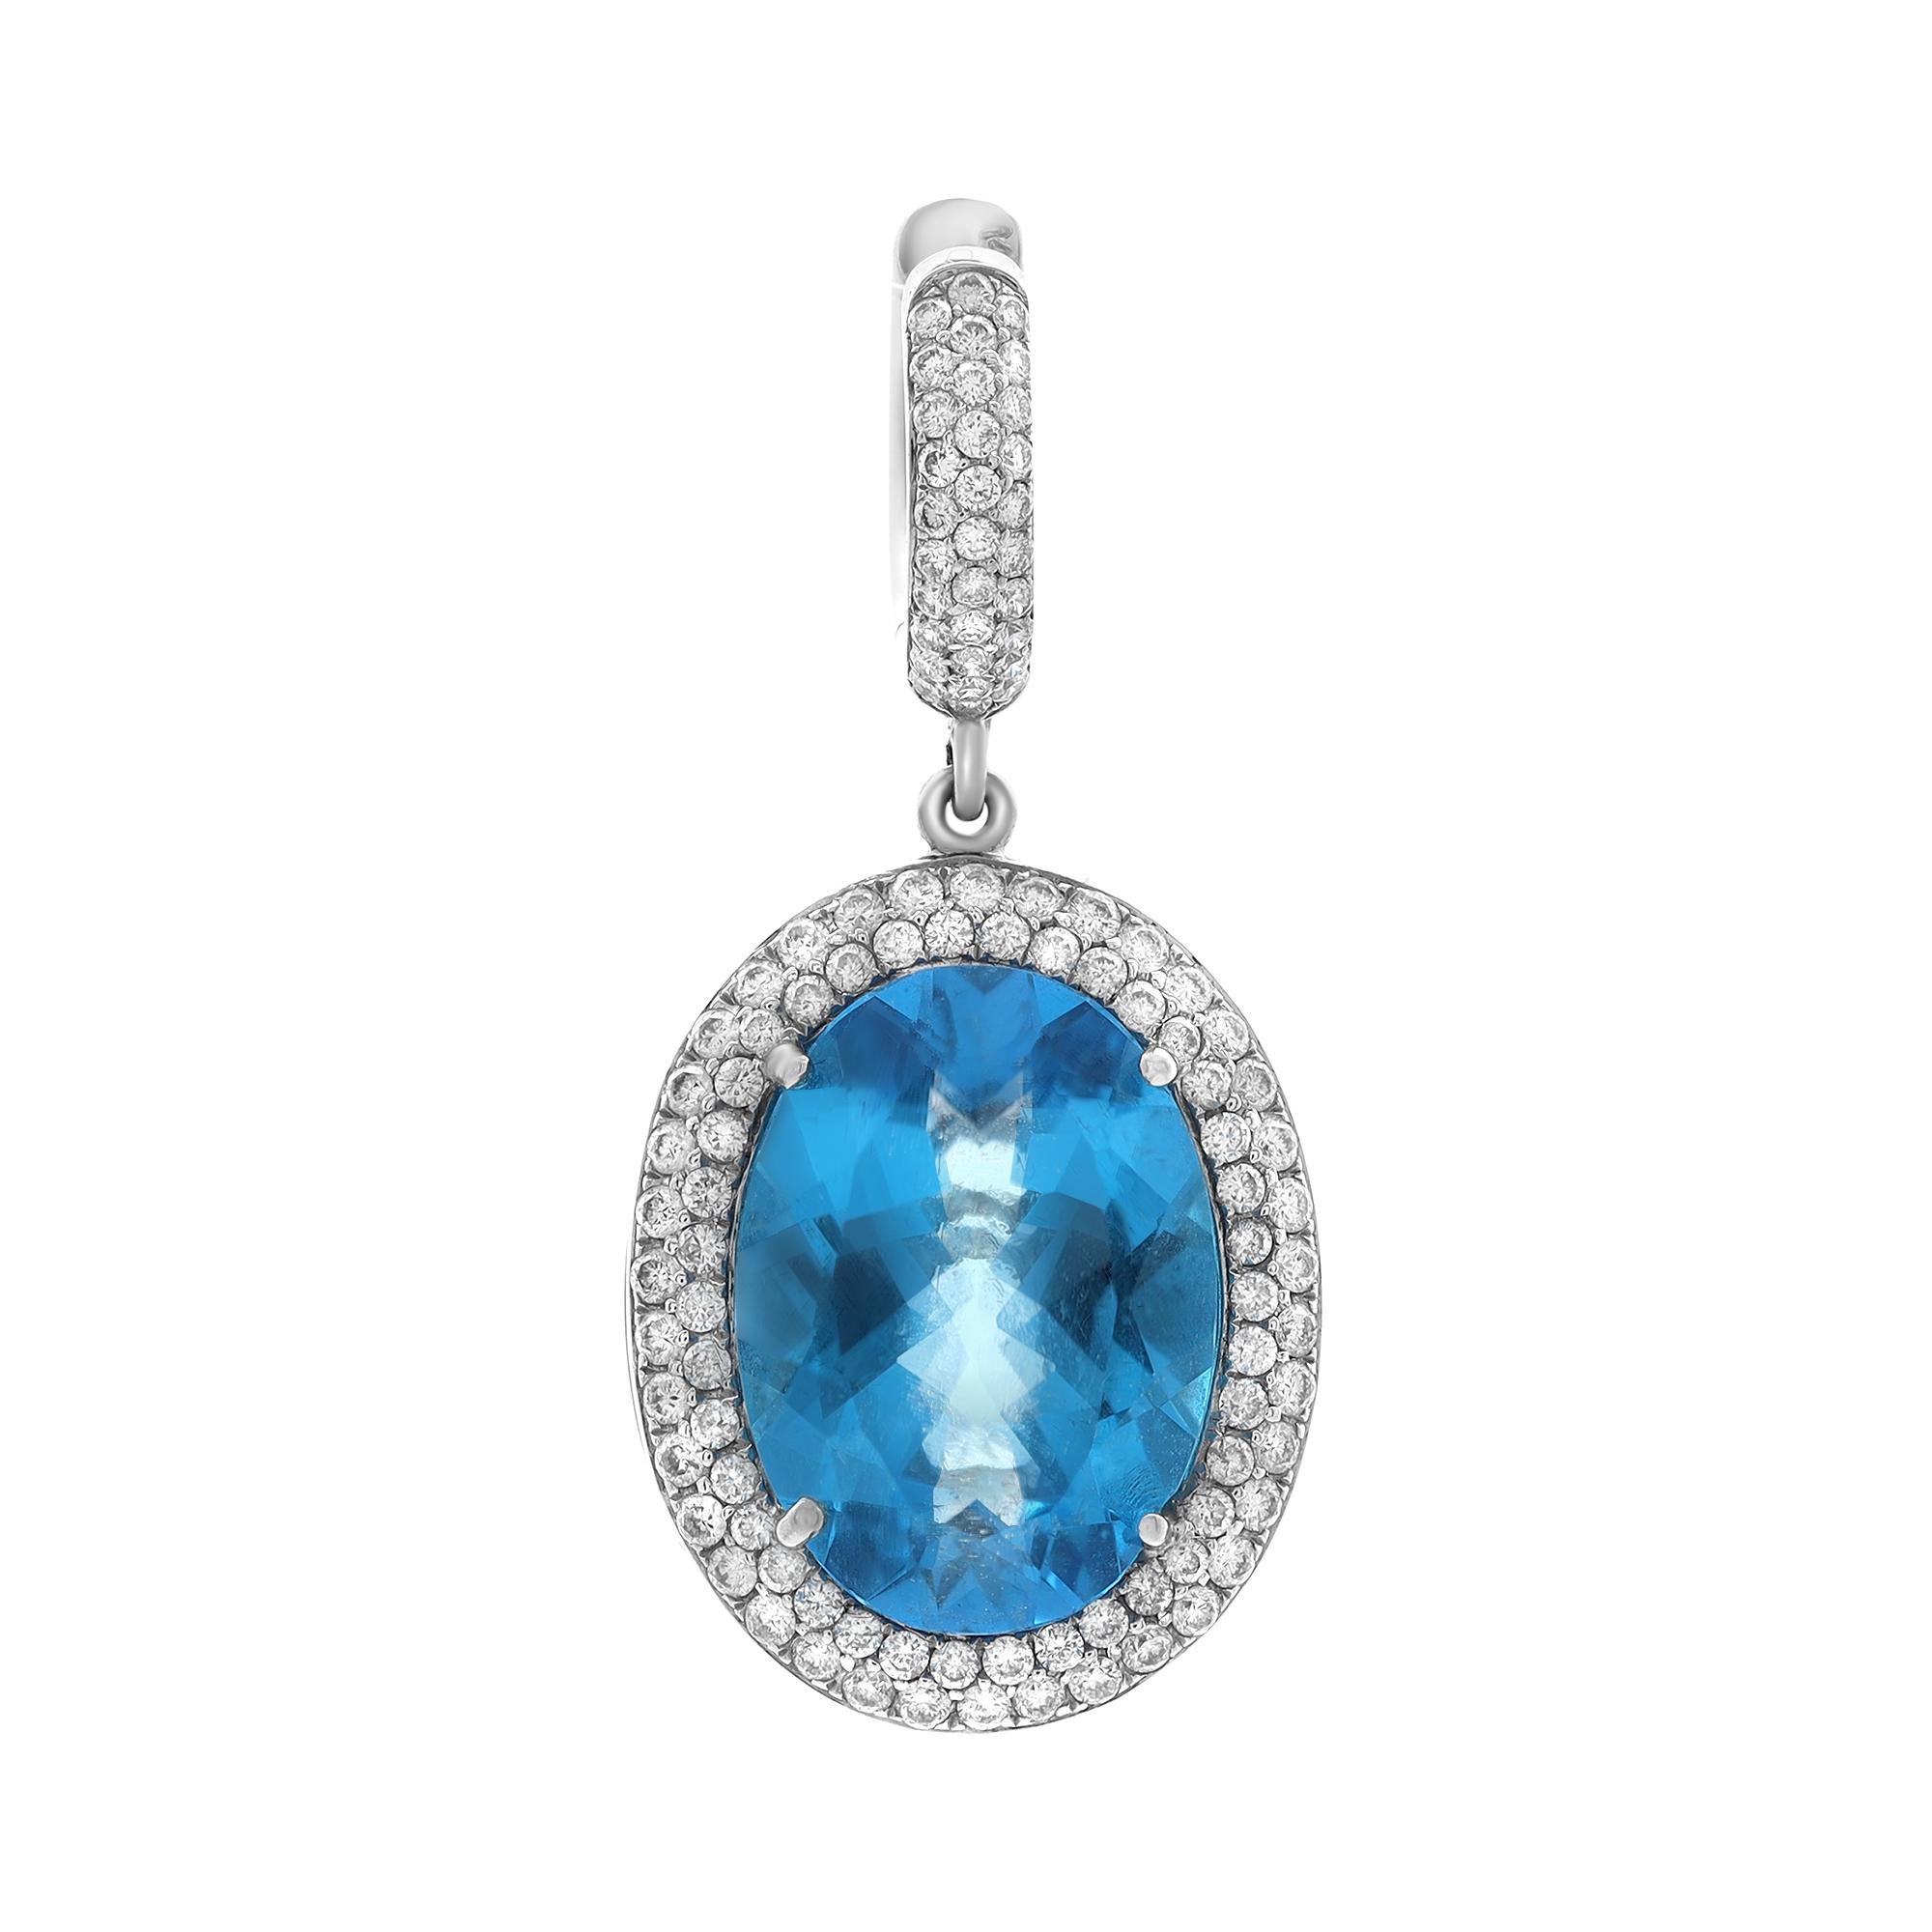 These stunning ladies drop earrings feature prong set oval shaped blue topaz weighing 25.50 carats with tiny pave set round brilliant cut diamonds weighing 2.40 carats. Diamonds are F-G color and SI1-SI2 clarity. Crafted in fine 14k white gold.